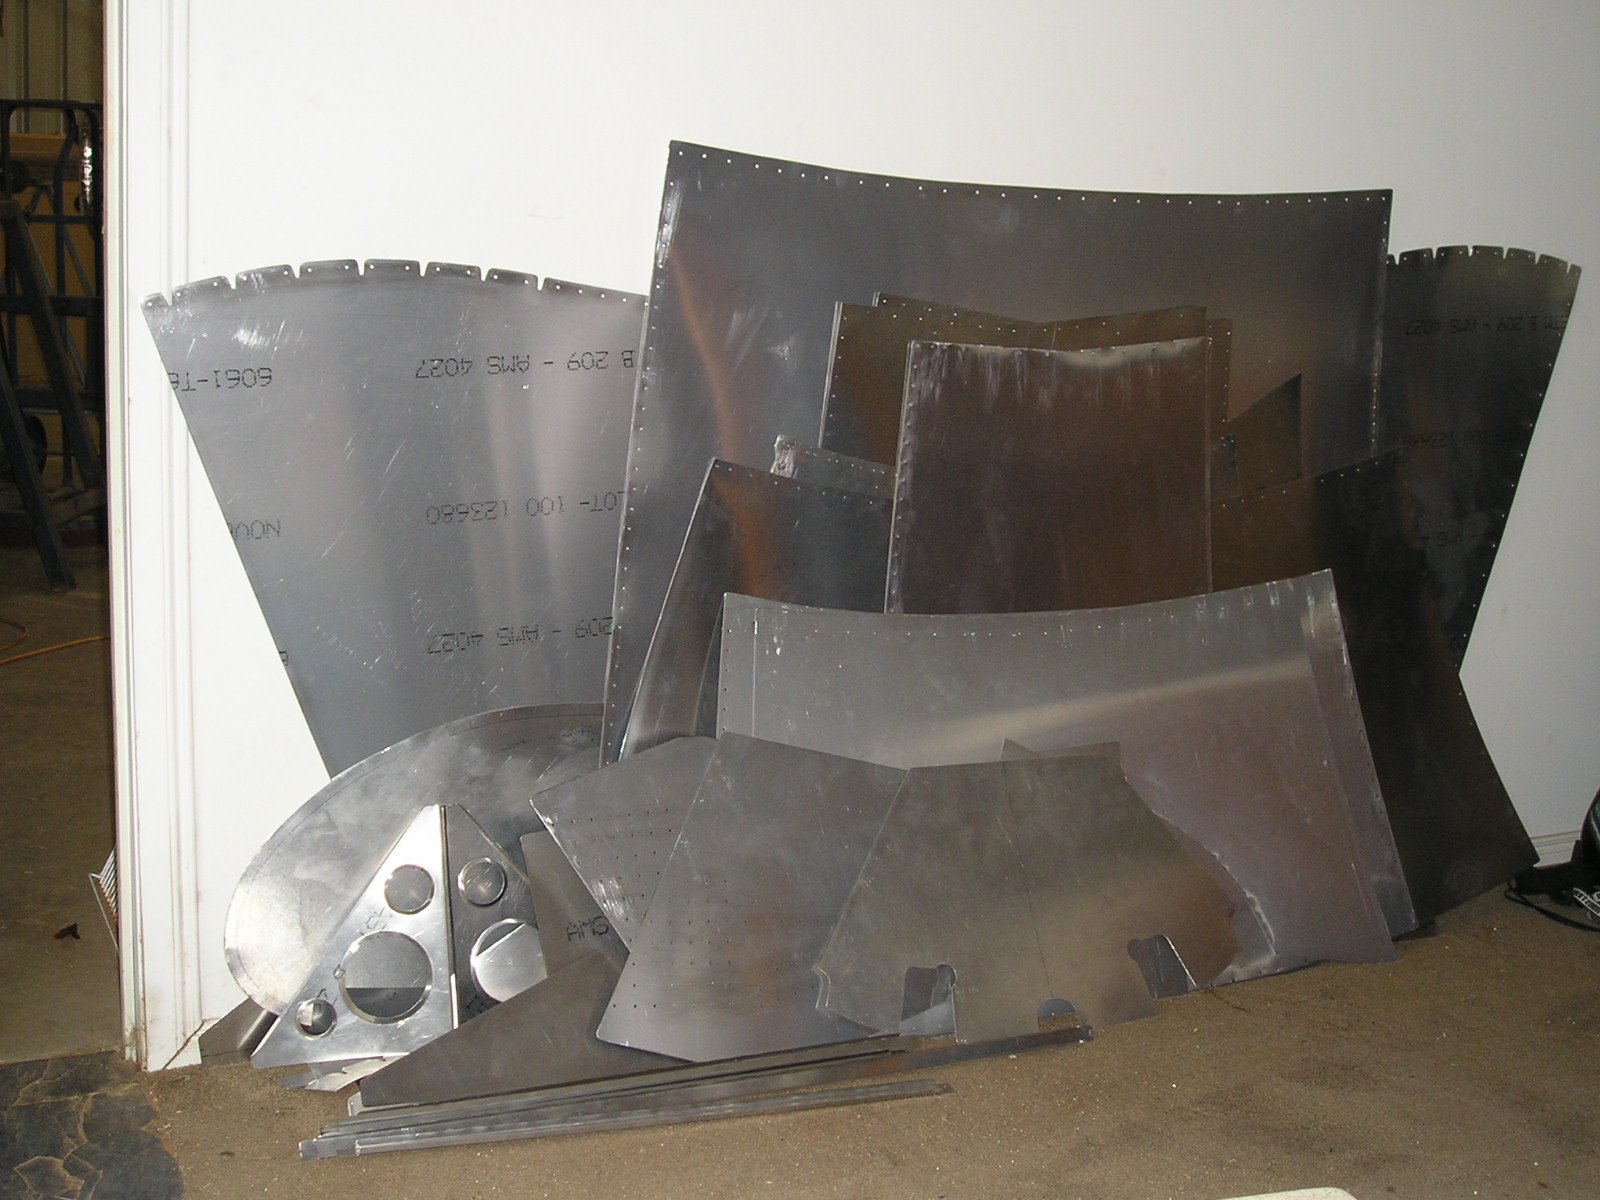 Skins precut and drilled